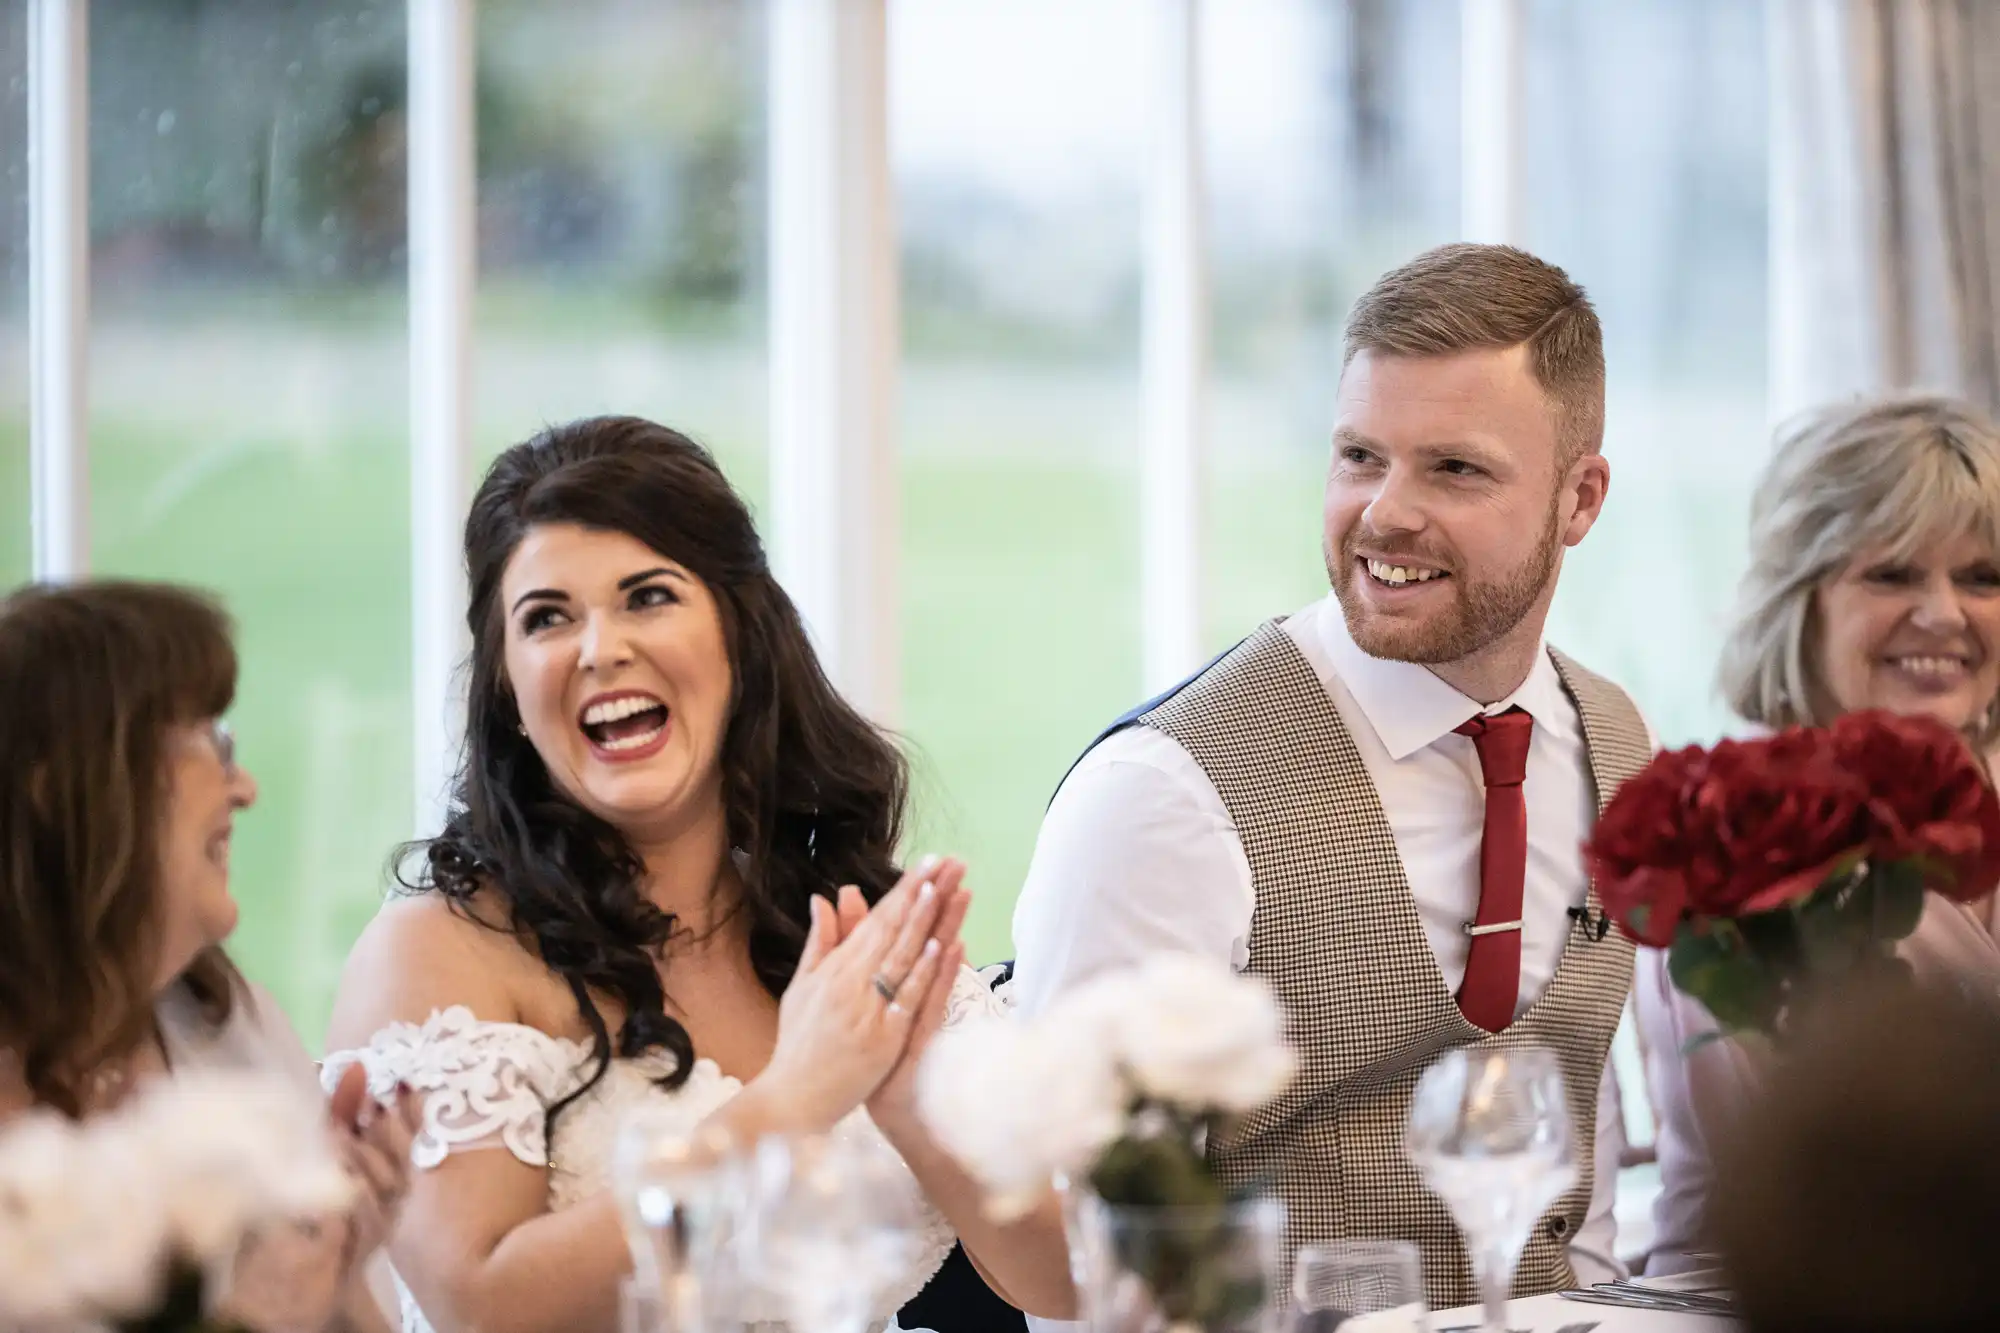 A bride and groom smile and laugh with guests at a table decorated with white flowers and red roses.